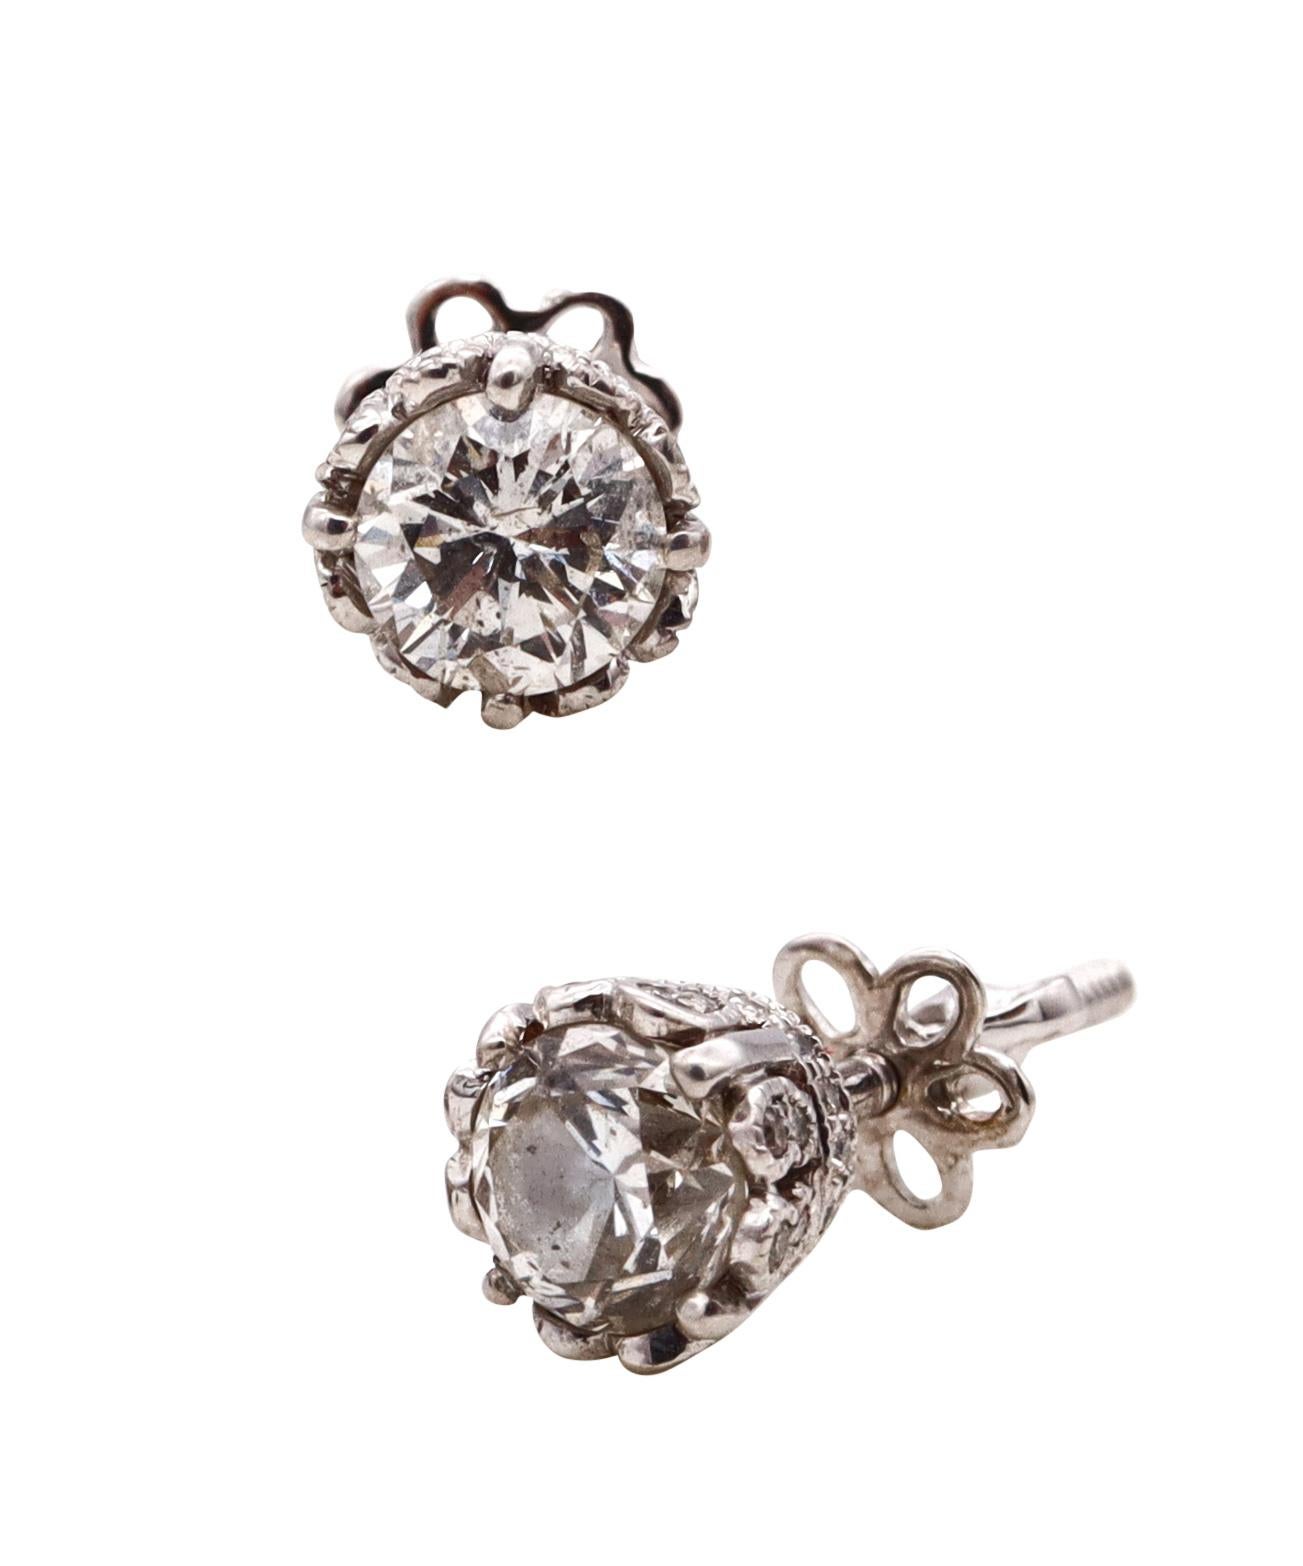 Platinum Art Deco Revival Studs Earrings with 1.29 Cts in Round Diamonds For Sale 1